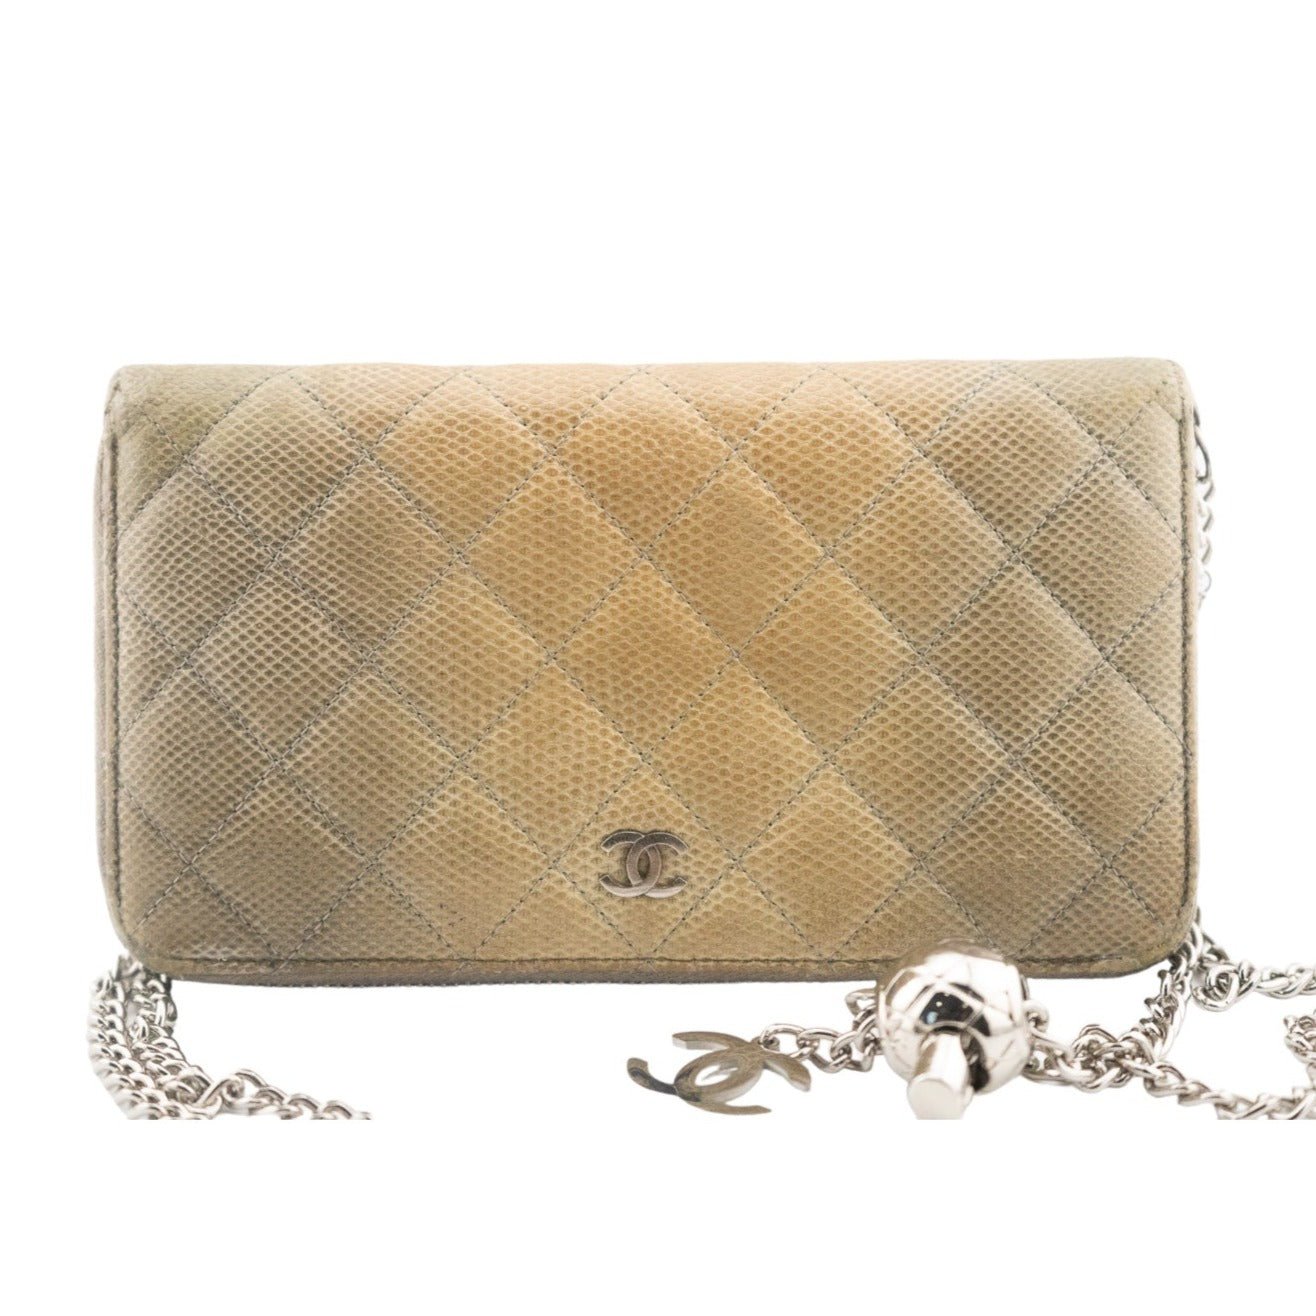 CHANEL Python Zip Wallet with Adjustable Chain - Bag Envy